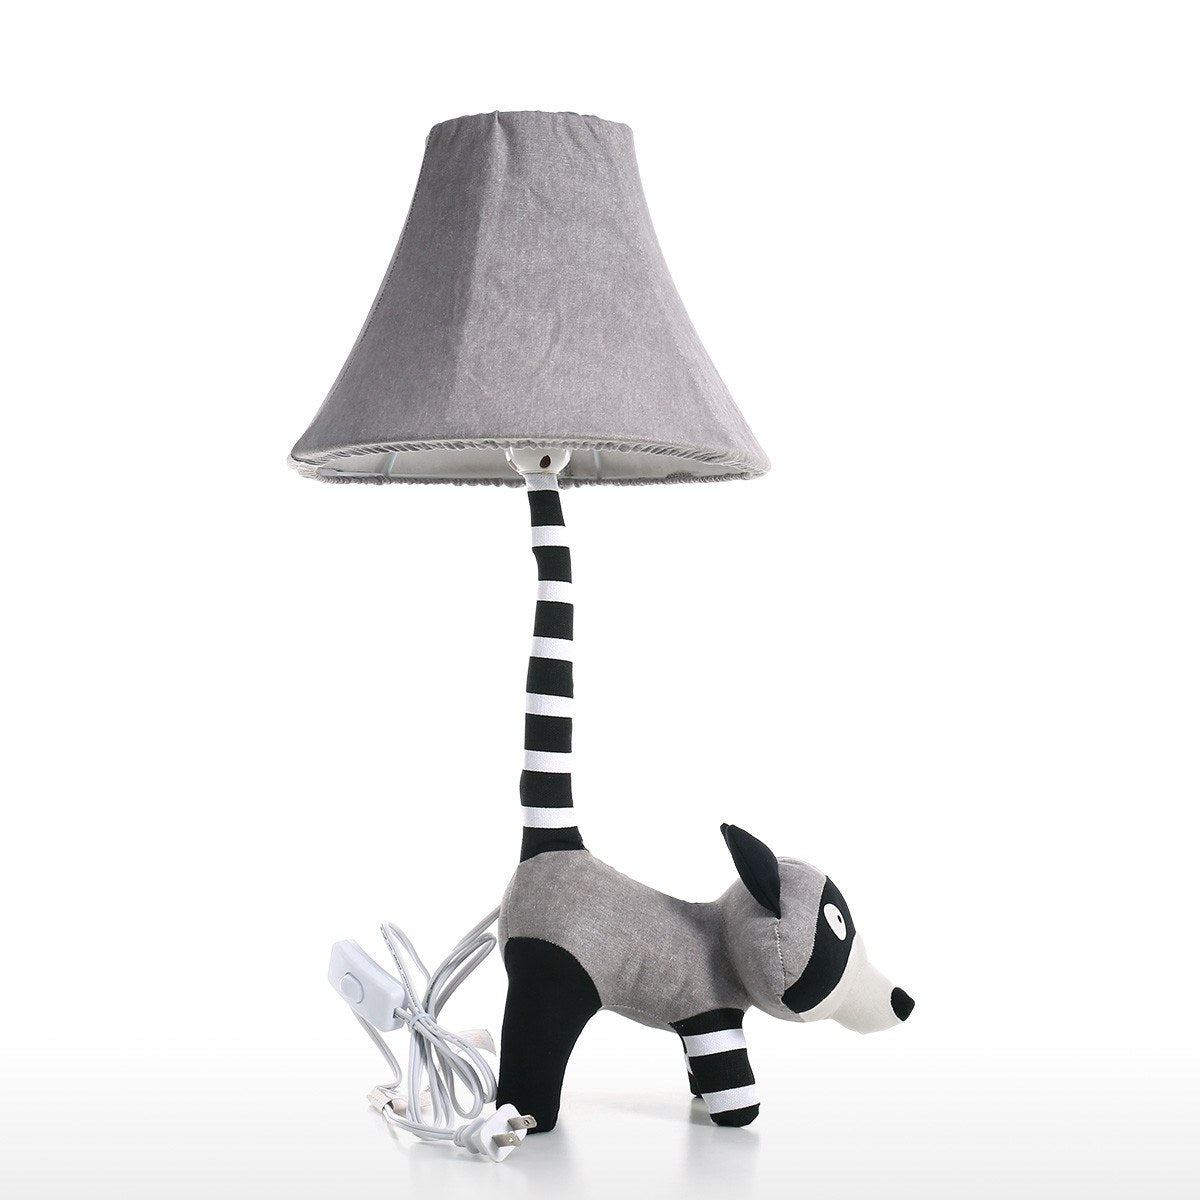 Lamp Shades for Table Lamp and Table Lamp Shades with Black and White Raccoon Nursery Decor